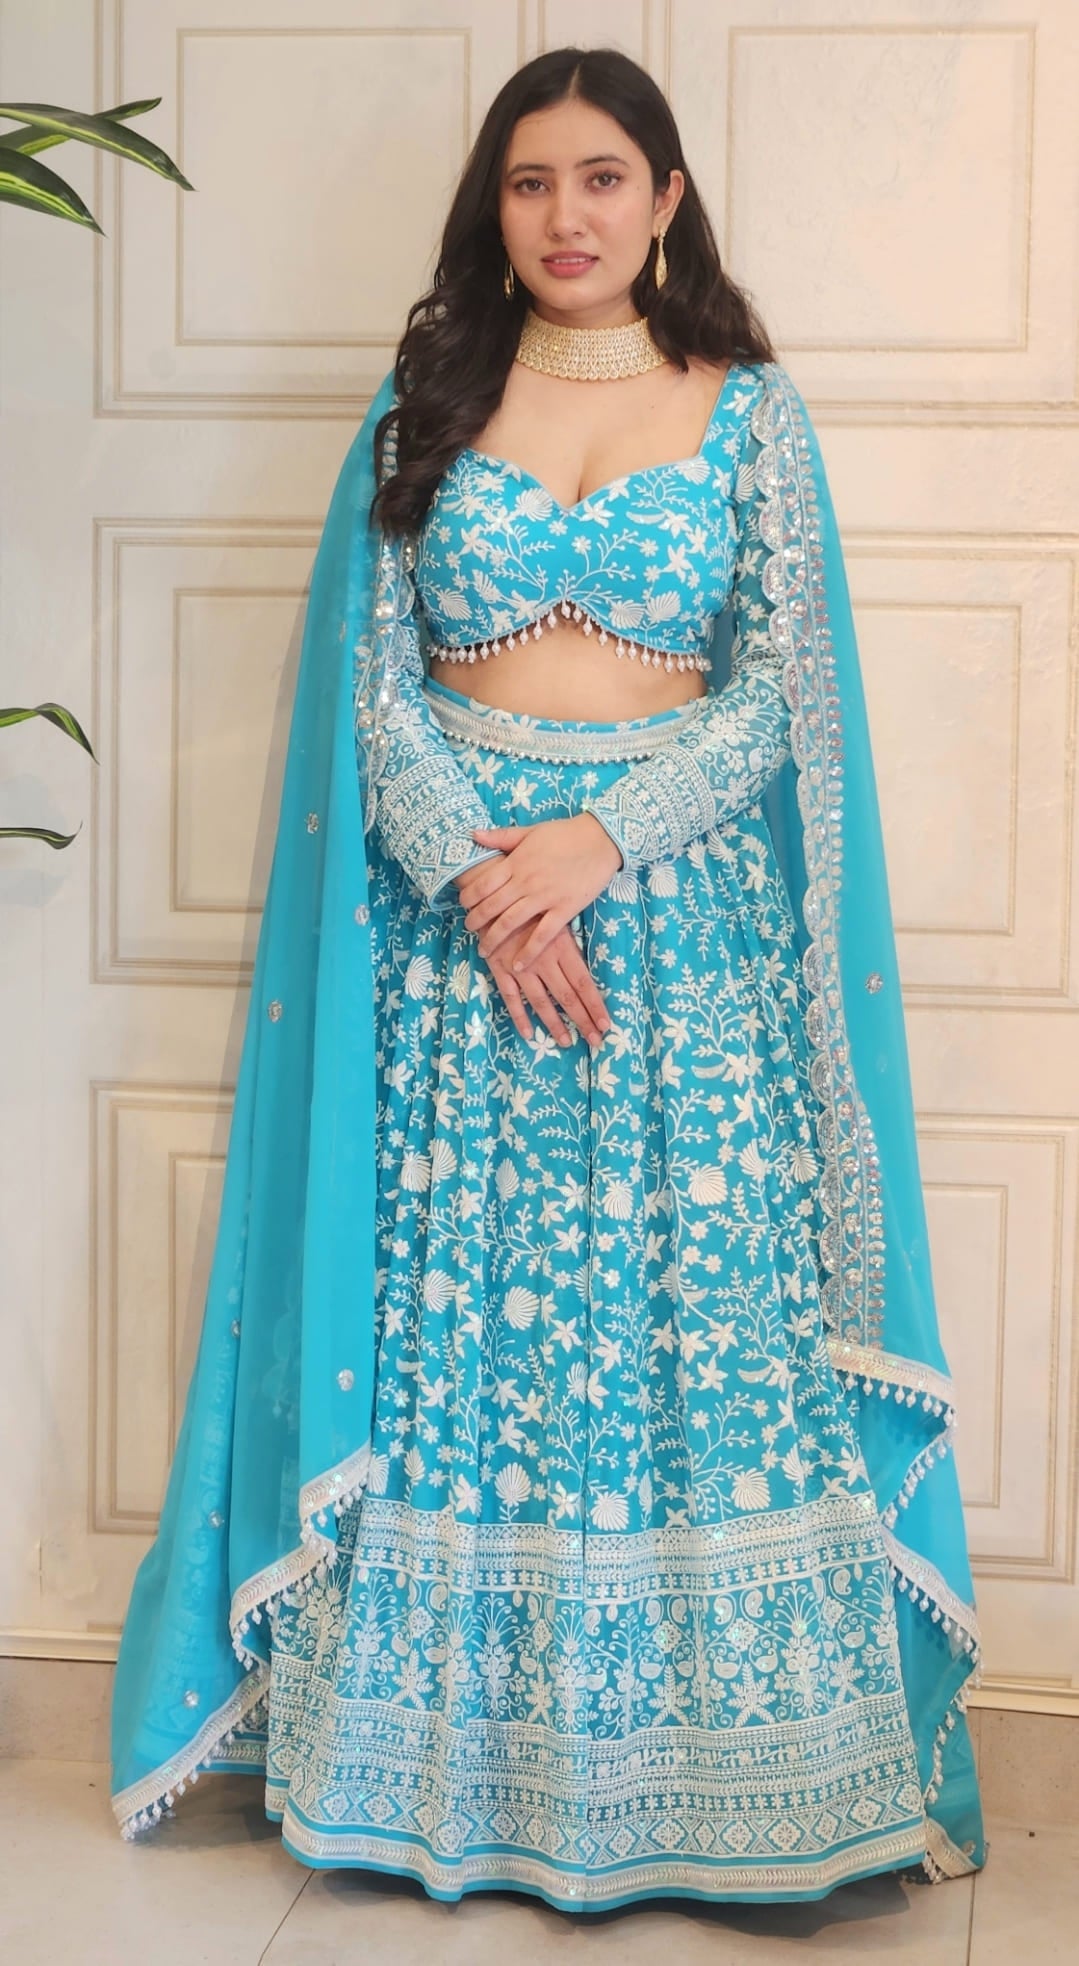 Aqua Blue Thread and Colourful Sequin Embroidered Lehenga with Boutique Blouse and Dupatta